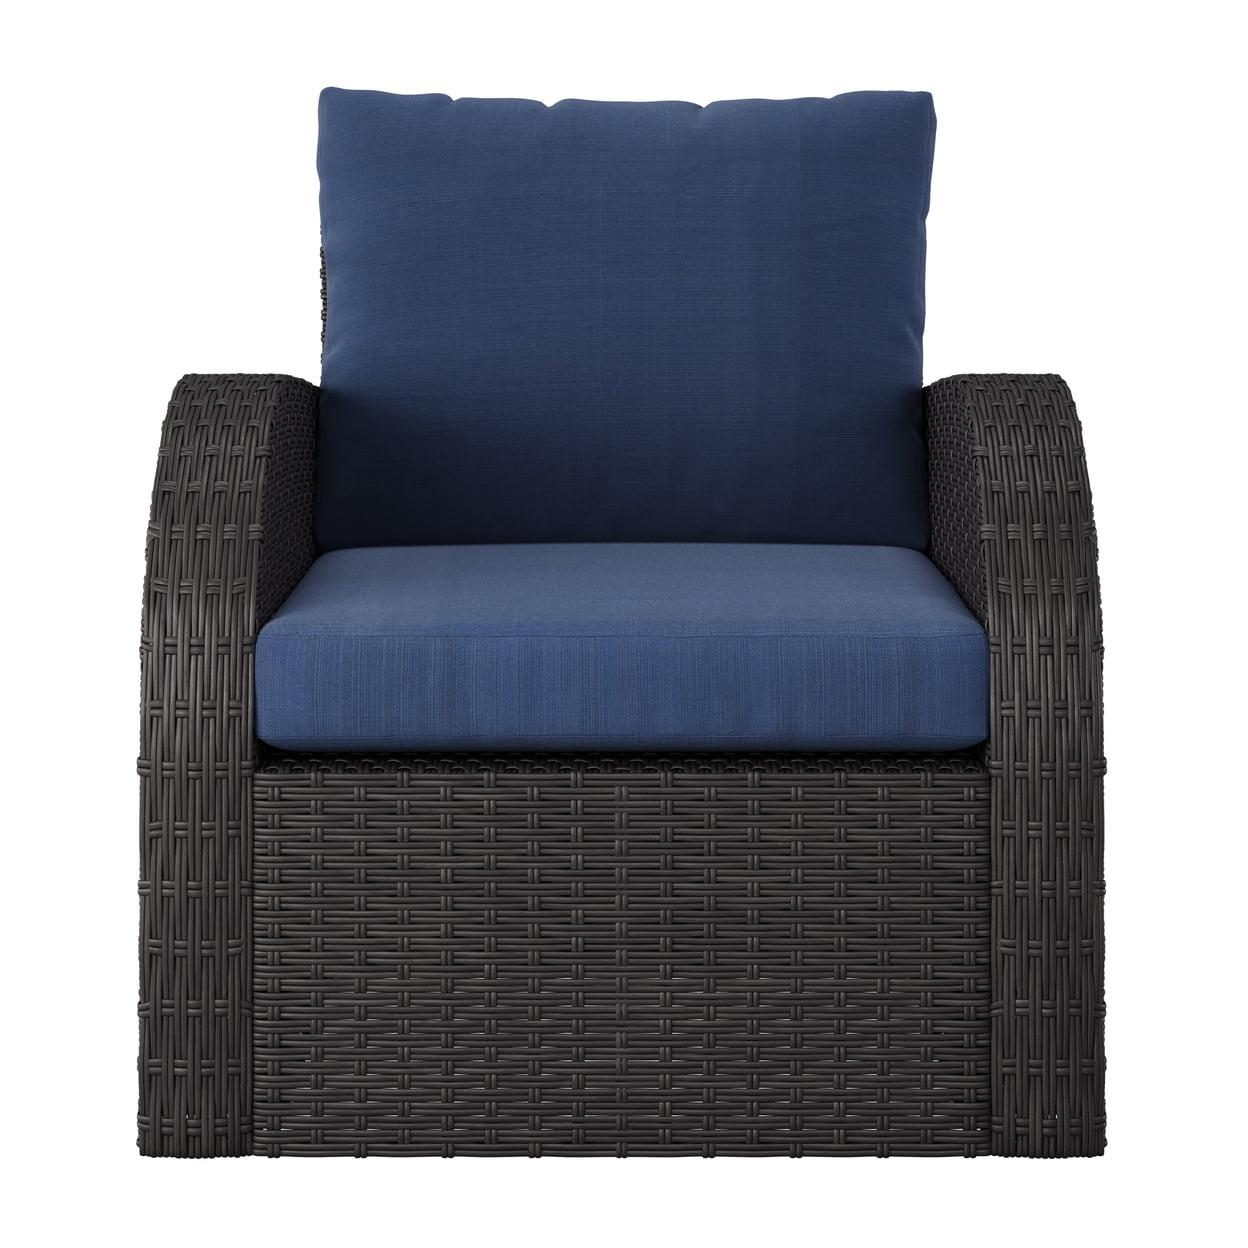 Brisbane Rust-Resistant Wicker Chair with Blue Cushions